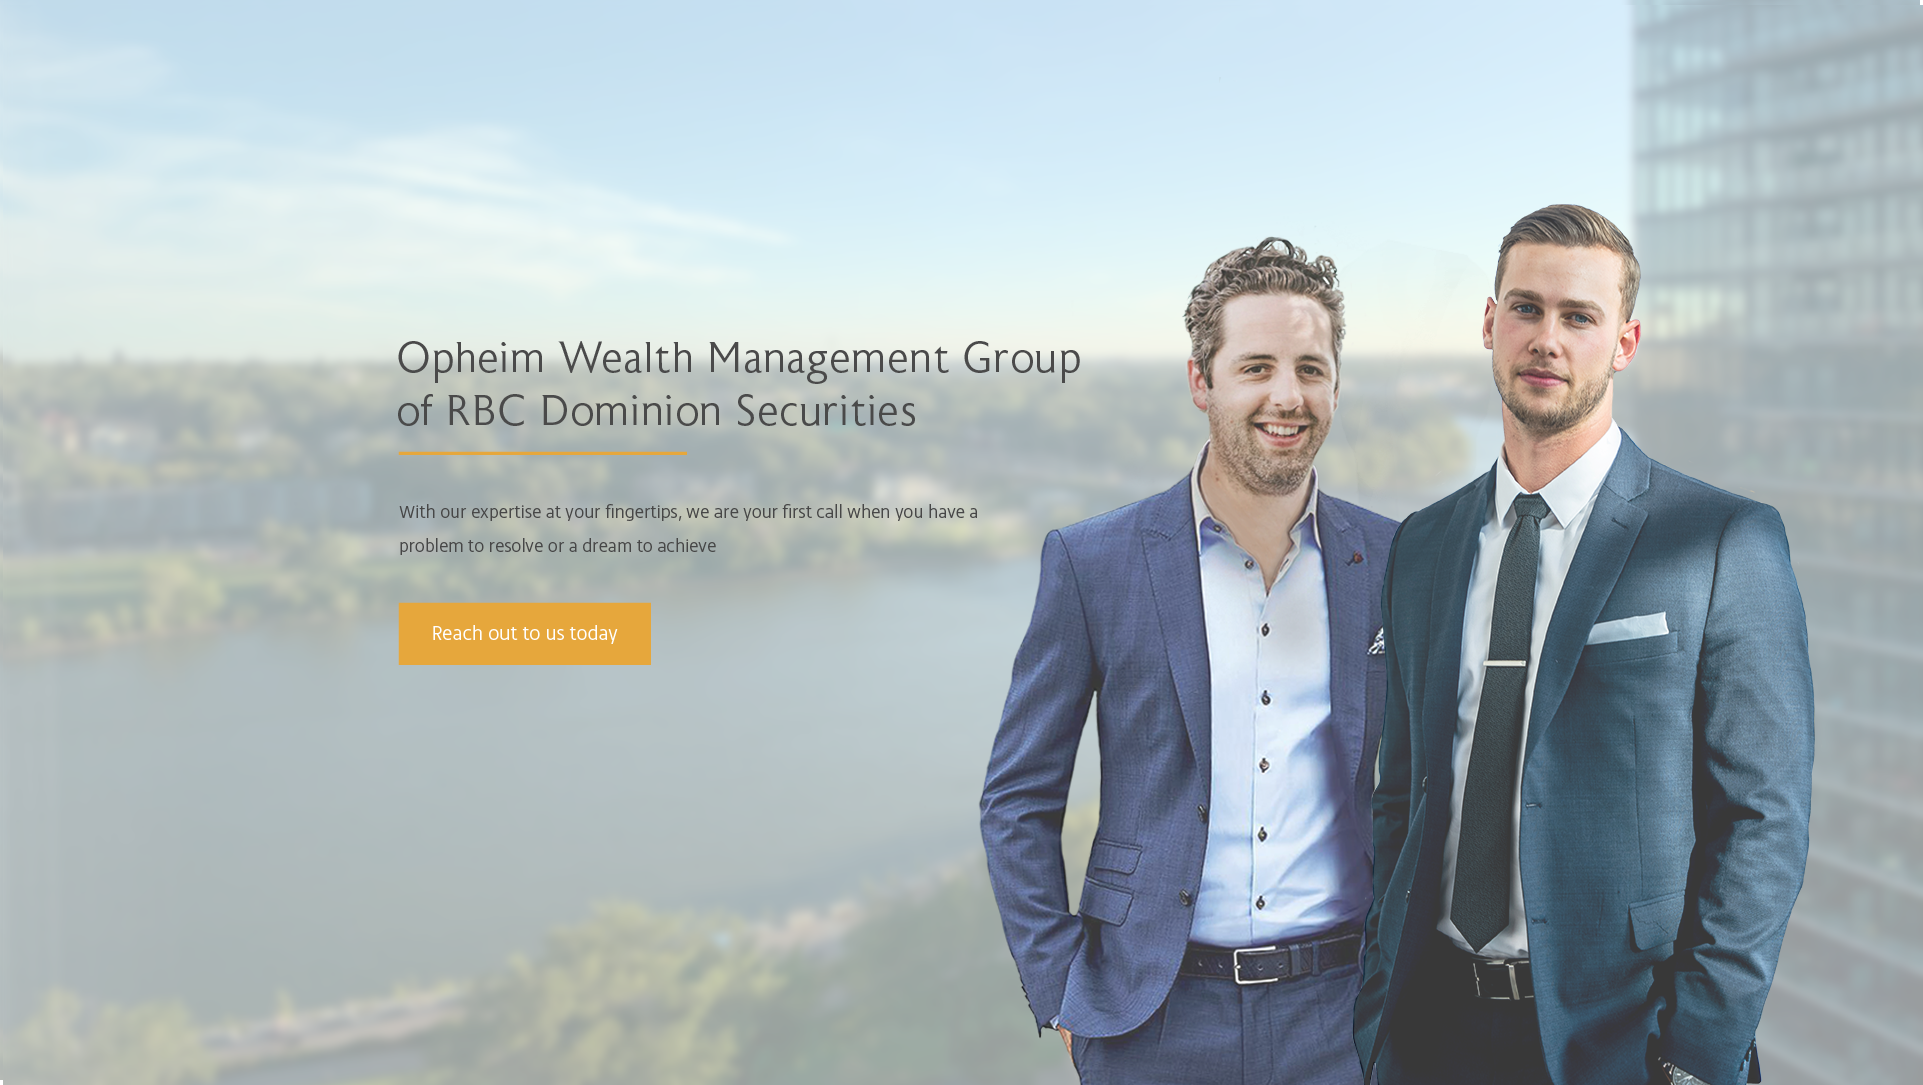 Opheim Wealth Management Group of RBC Dominion Securities